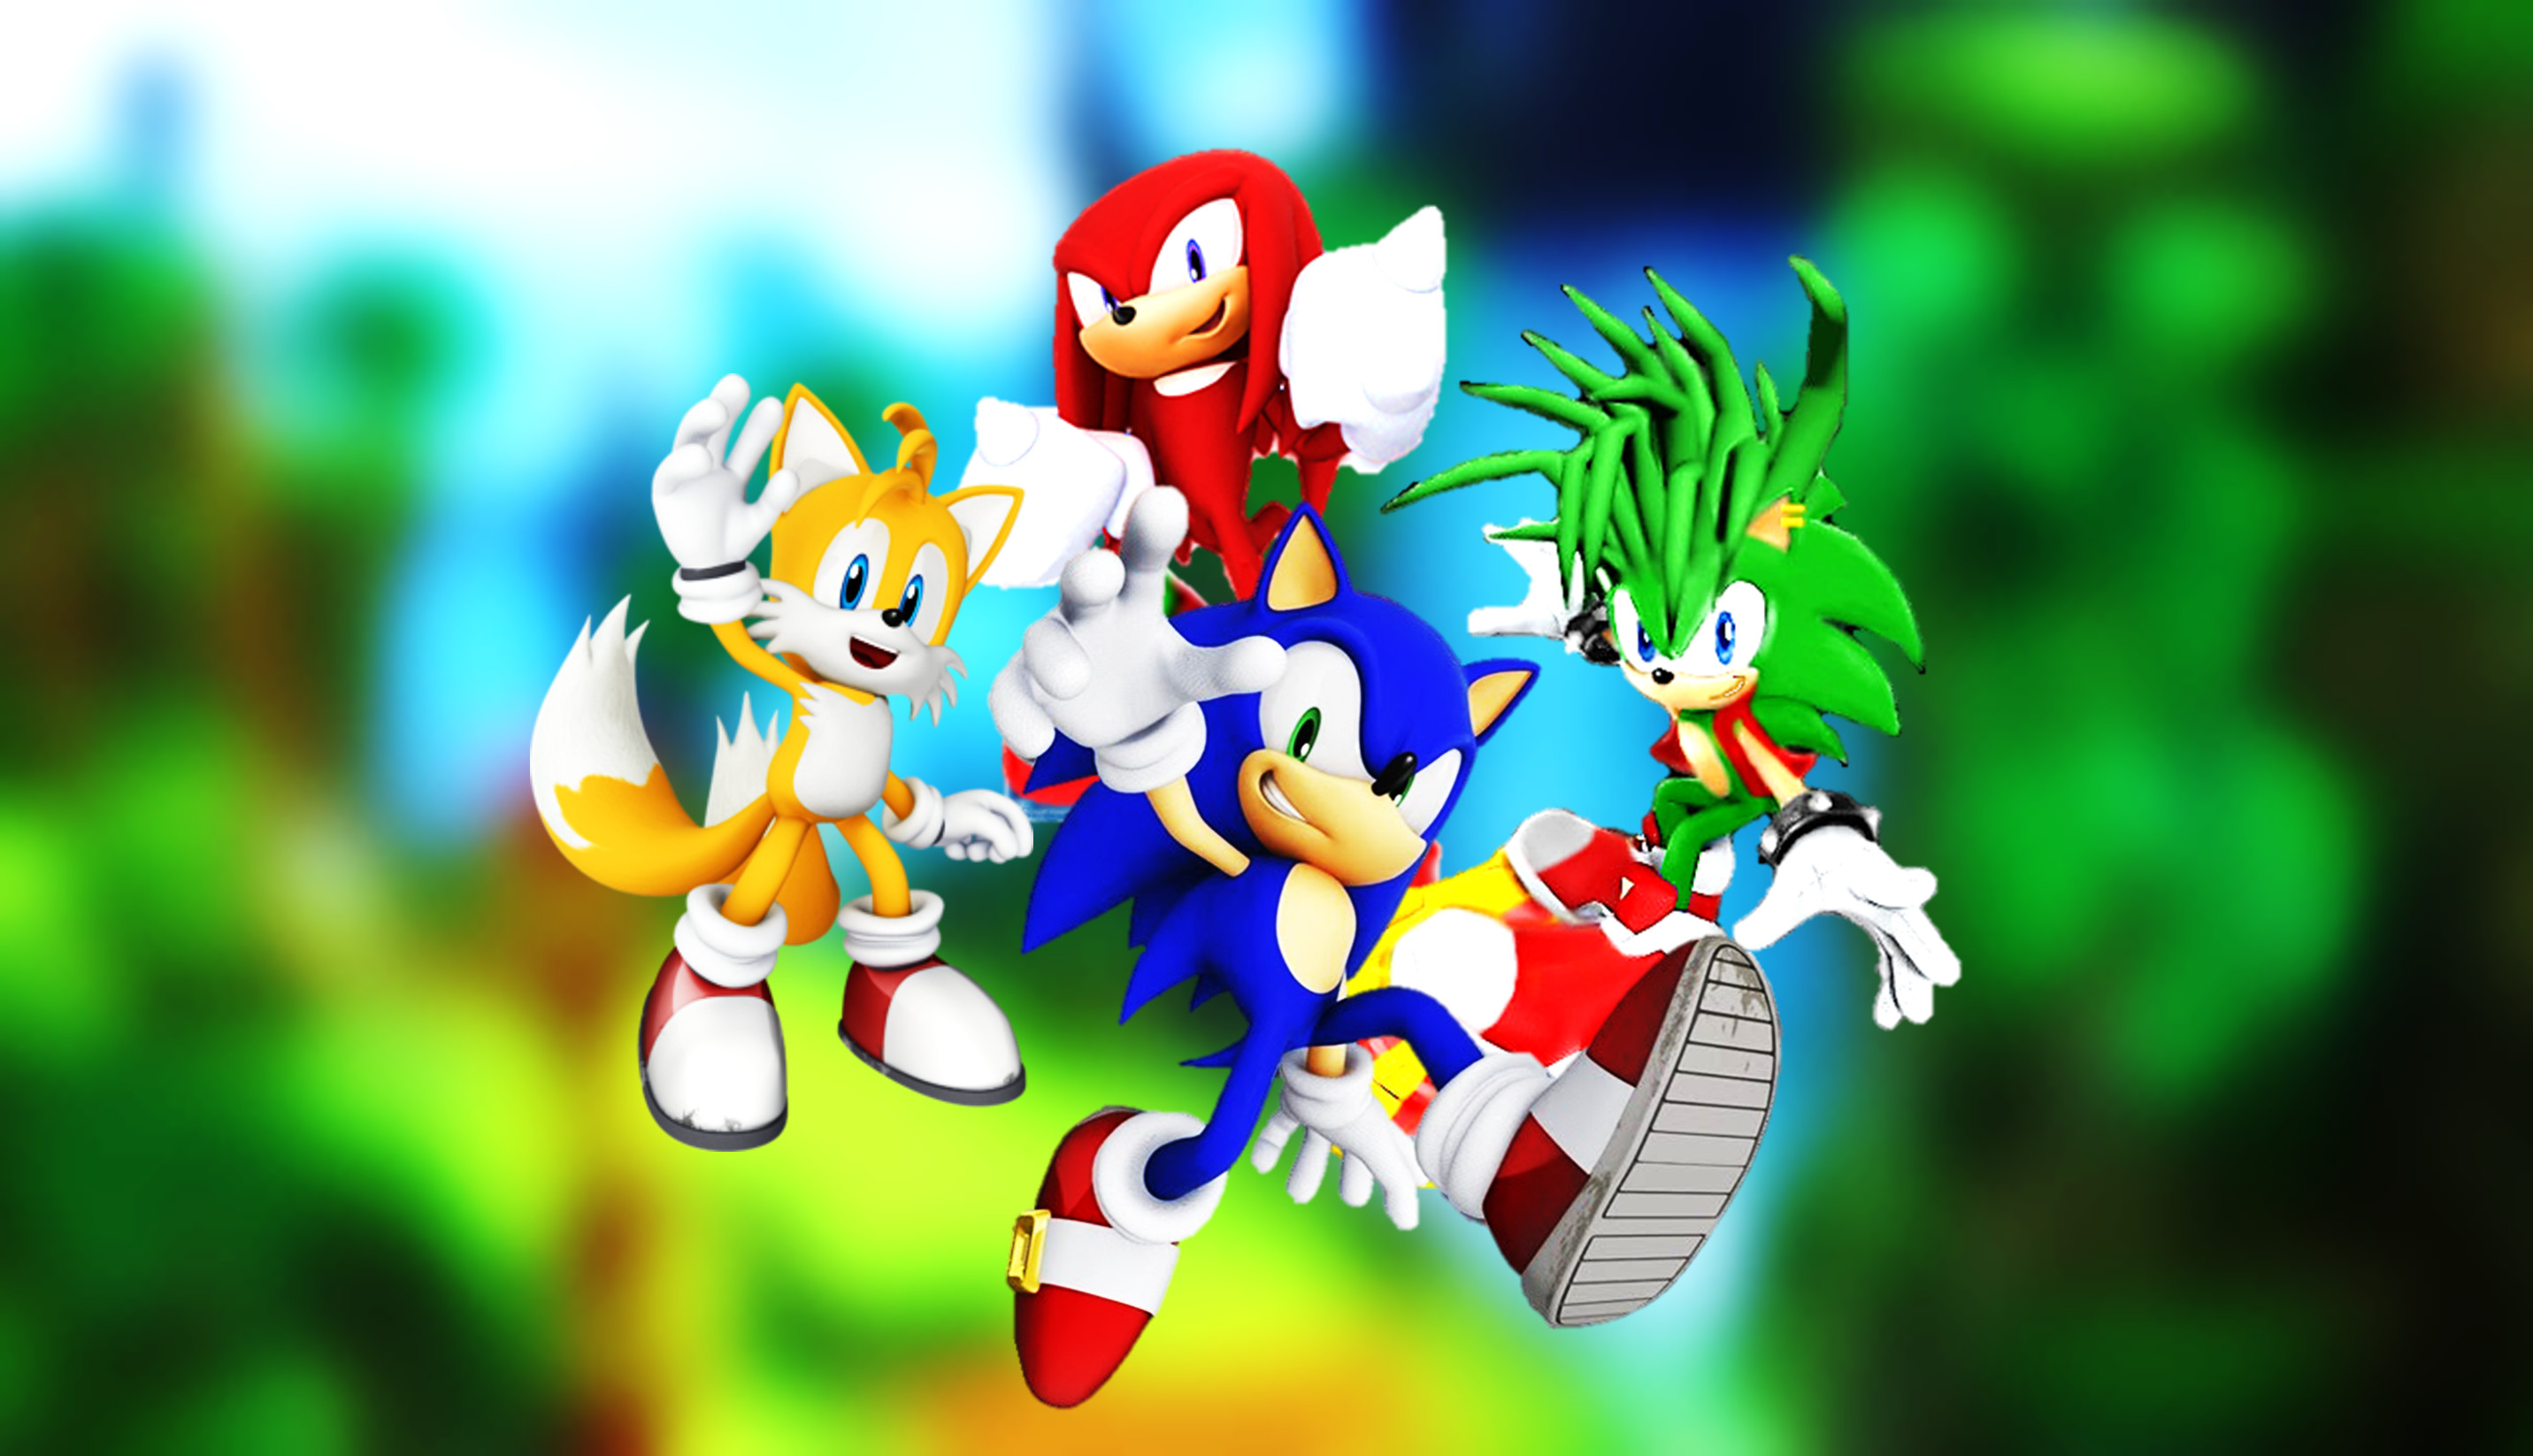 Sonic The Hedgehog Image Sonic Tails Knuckles And Knuckles And Manic